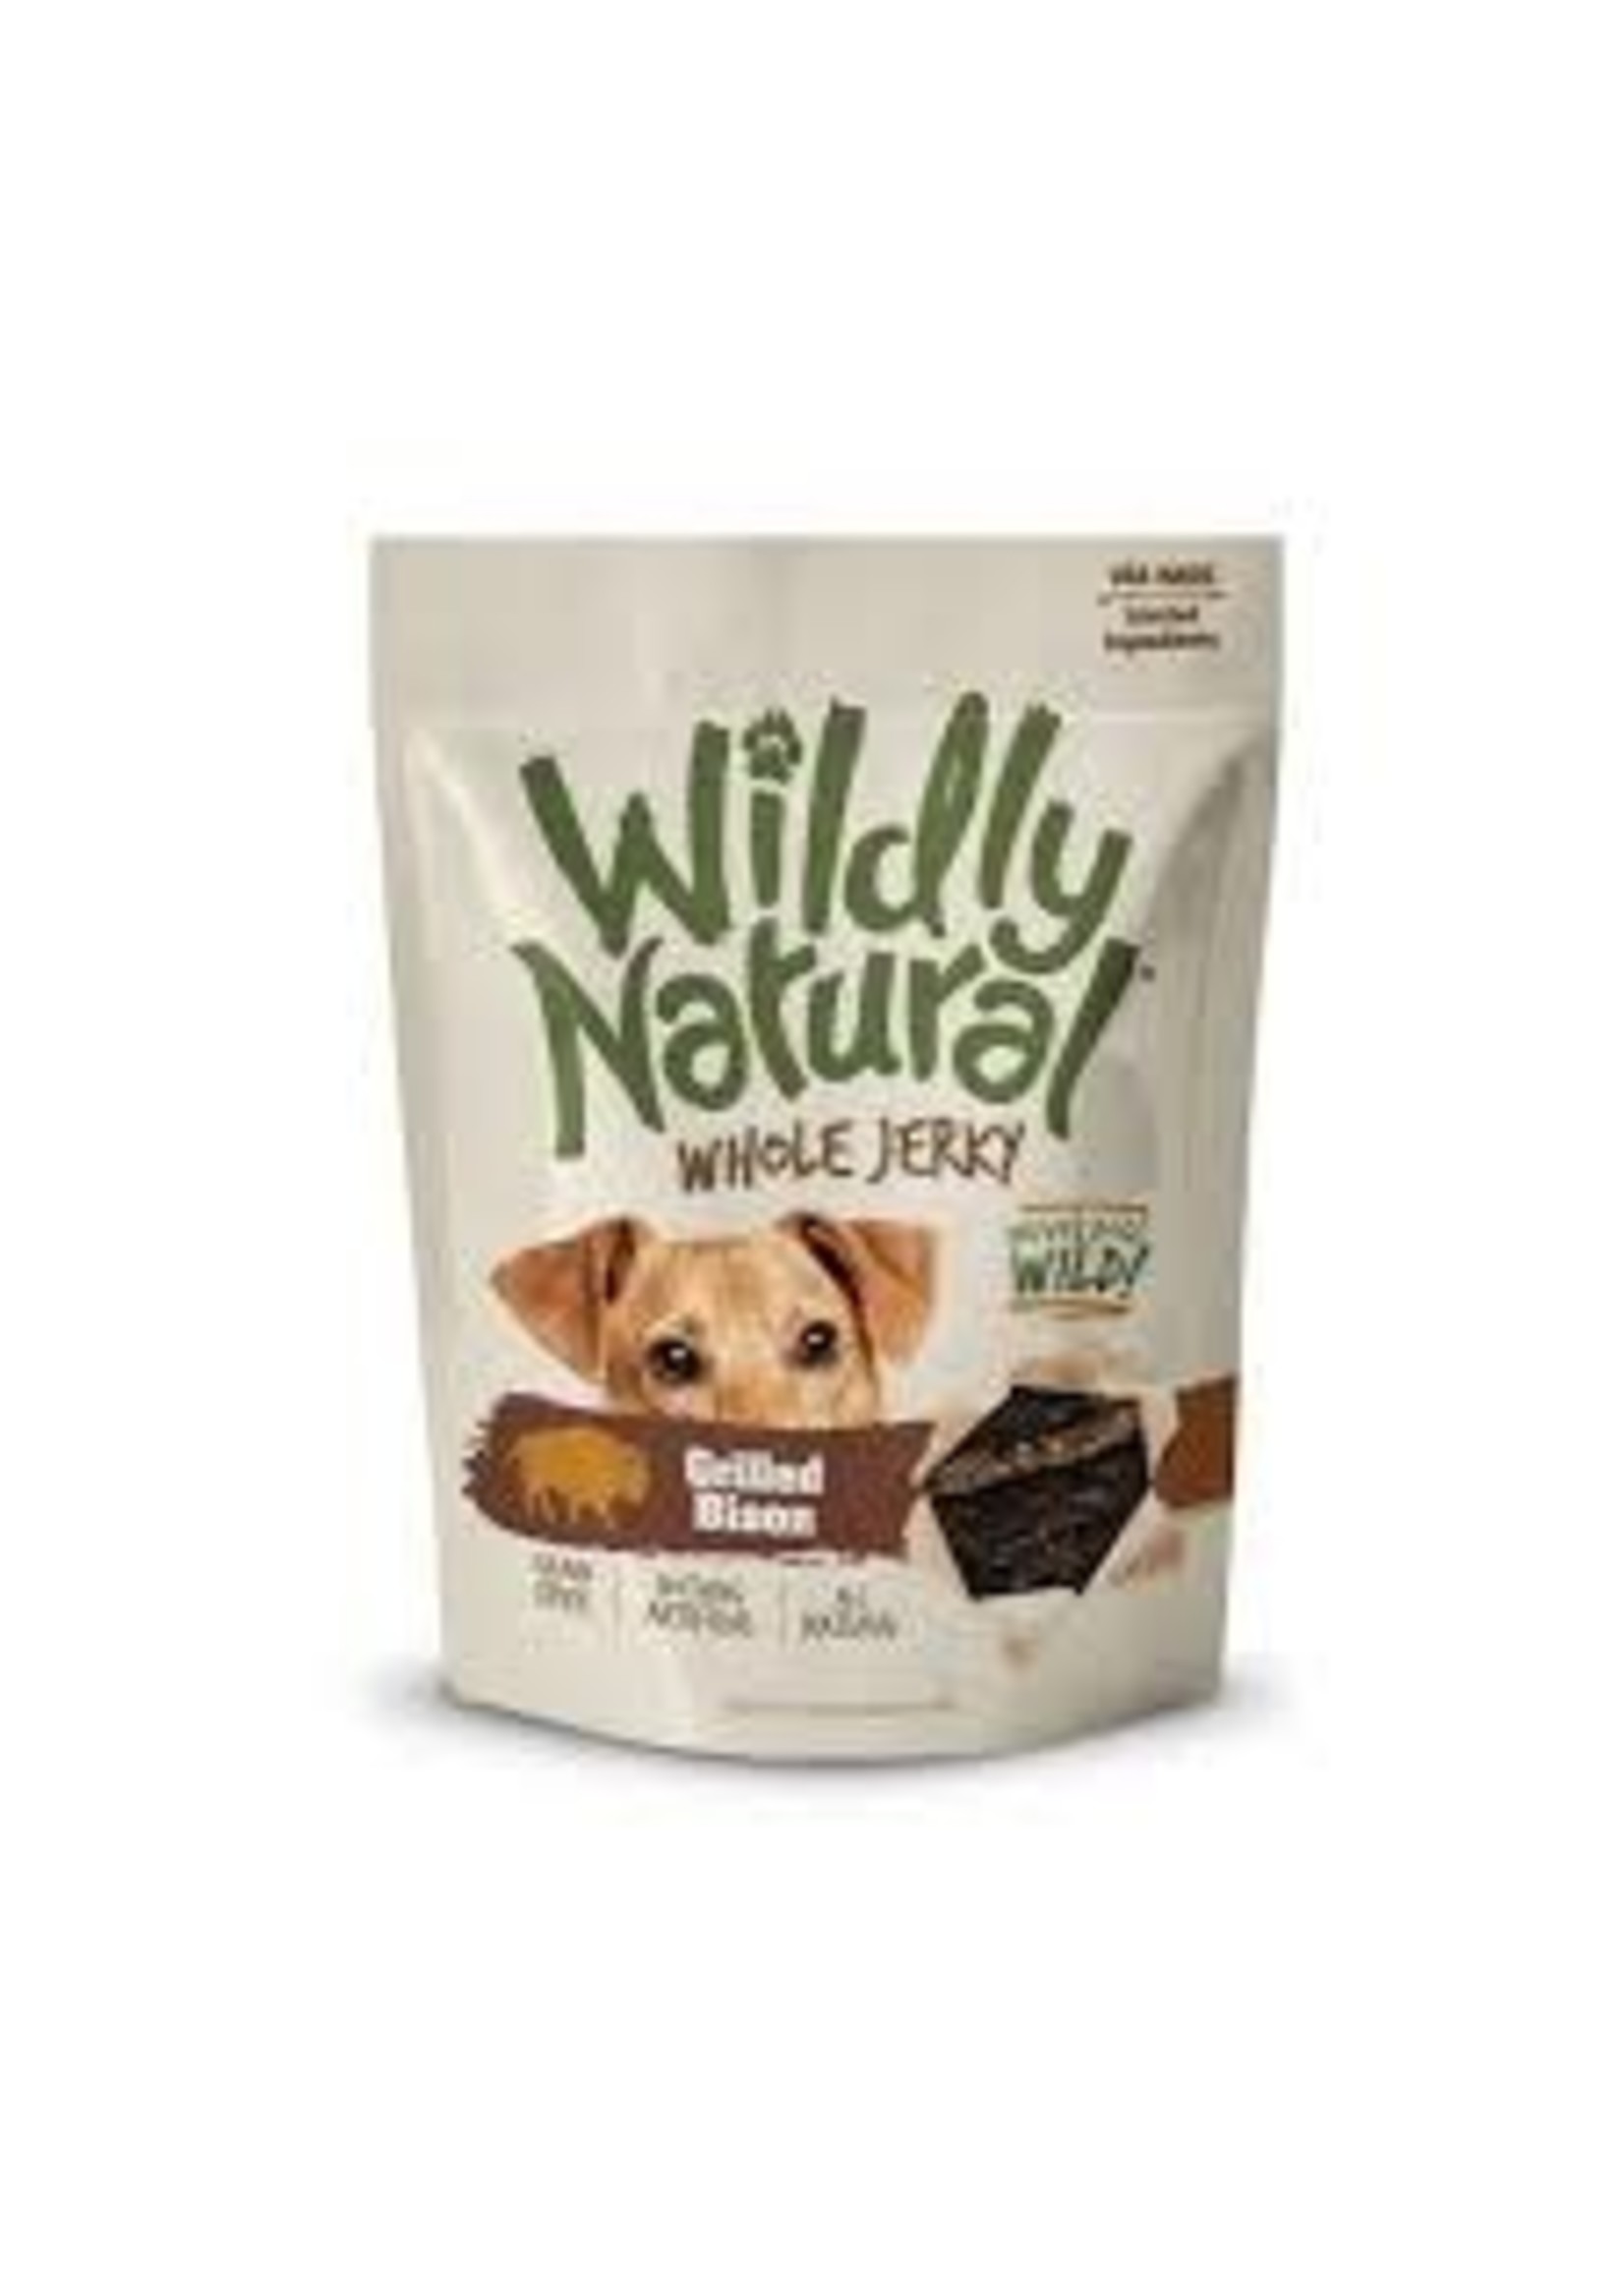 Wildly Natural Wildly Natural Whole Jerky Strips Grilled Bison 141g